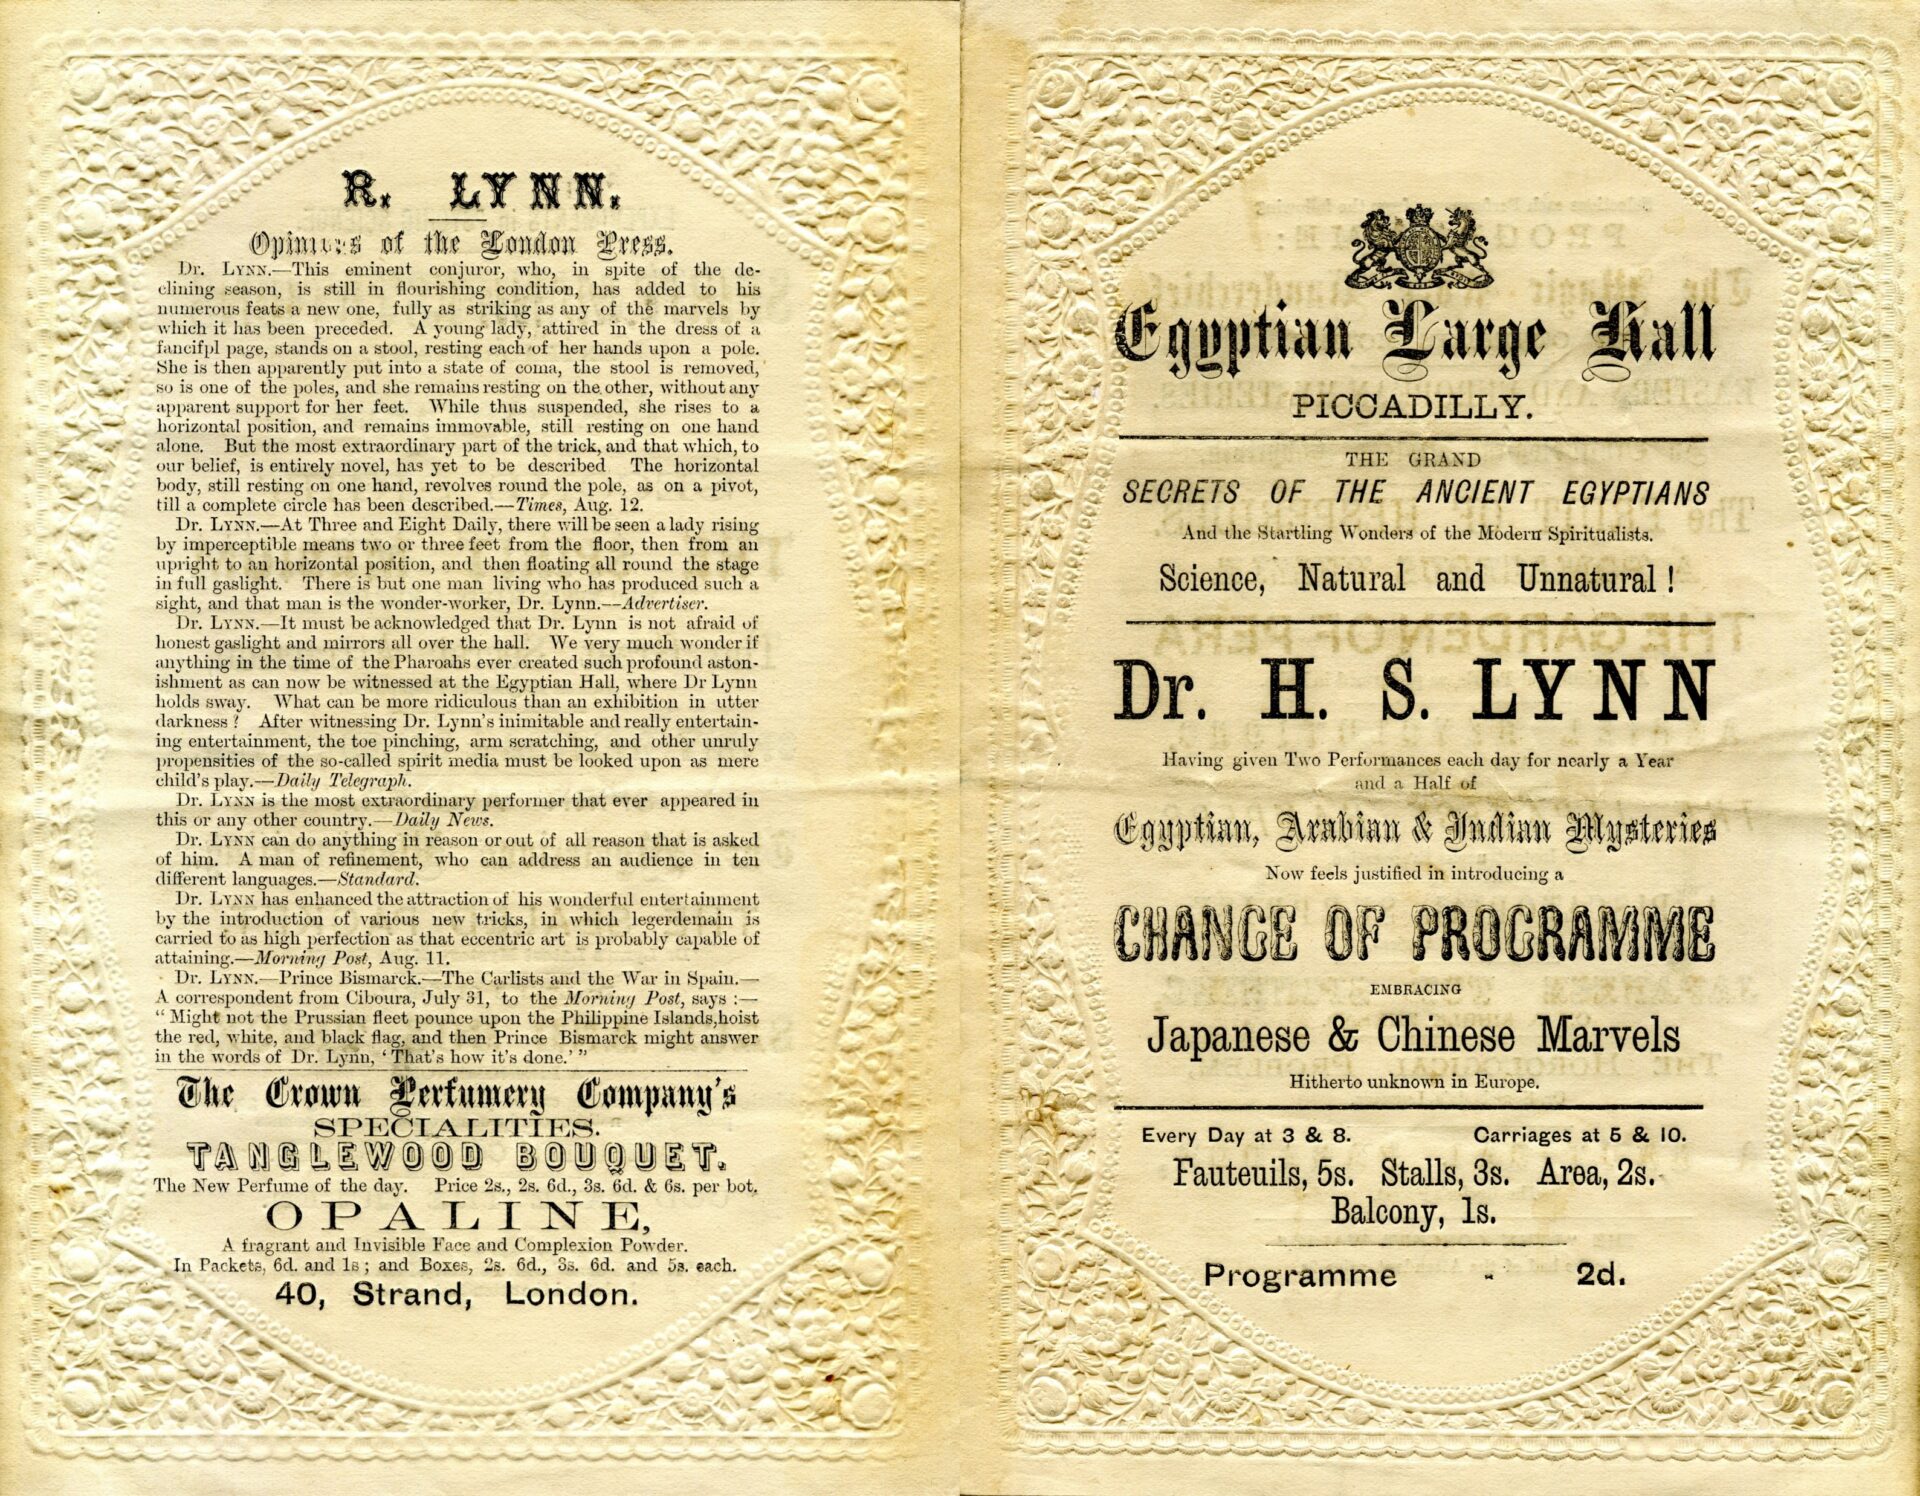 Programme for Dr H.S. Lynn at the Egyptian Hall